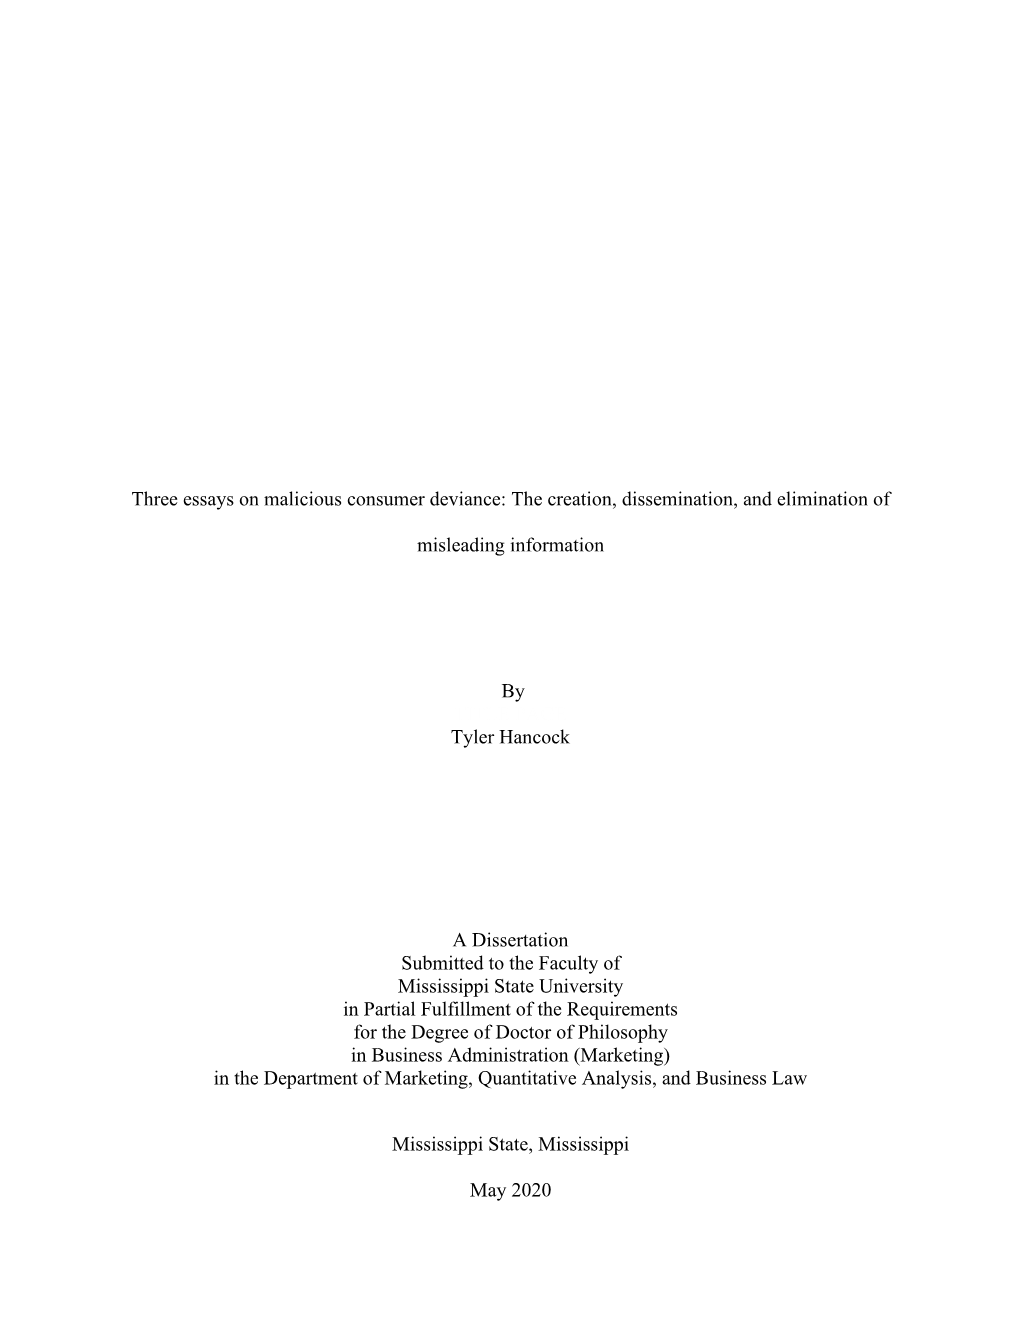 Three Essays on Malicious Consumer Deviance: the Creation, Dissemination, and Elimination Of